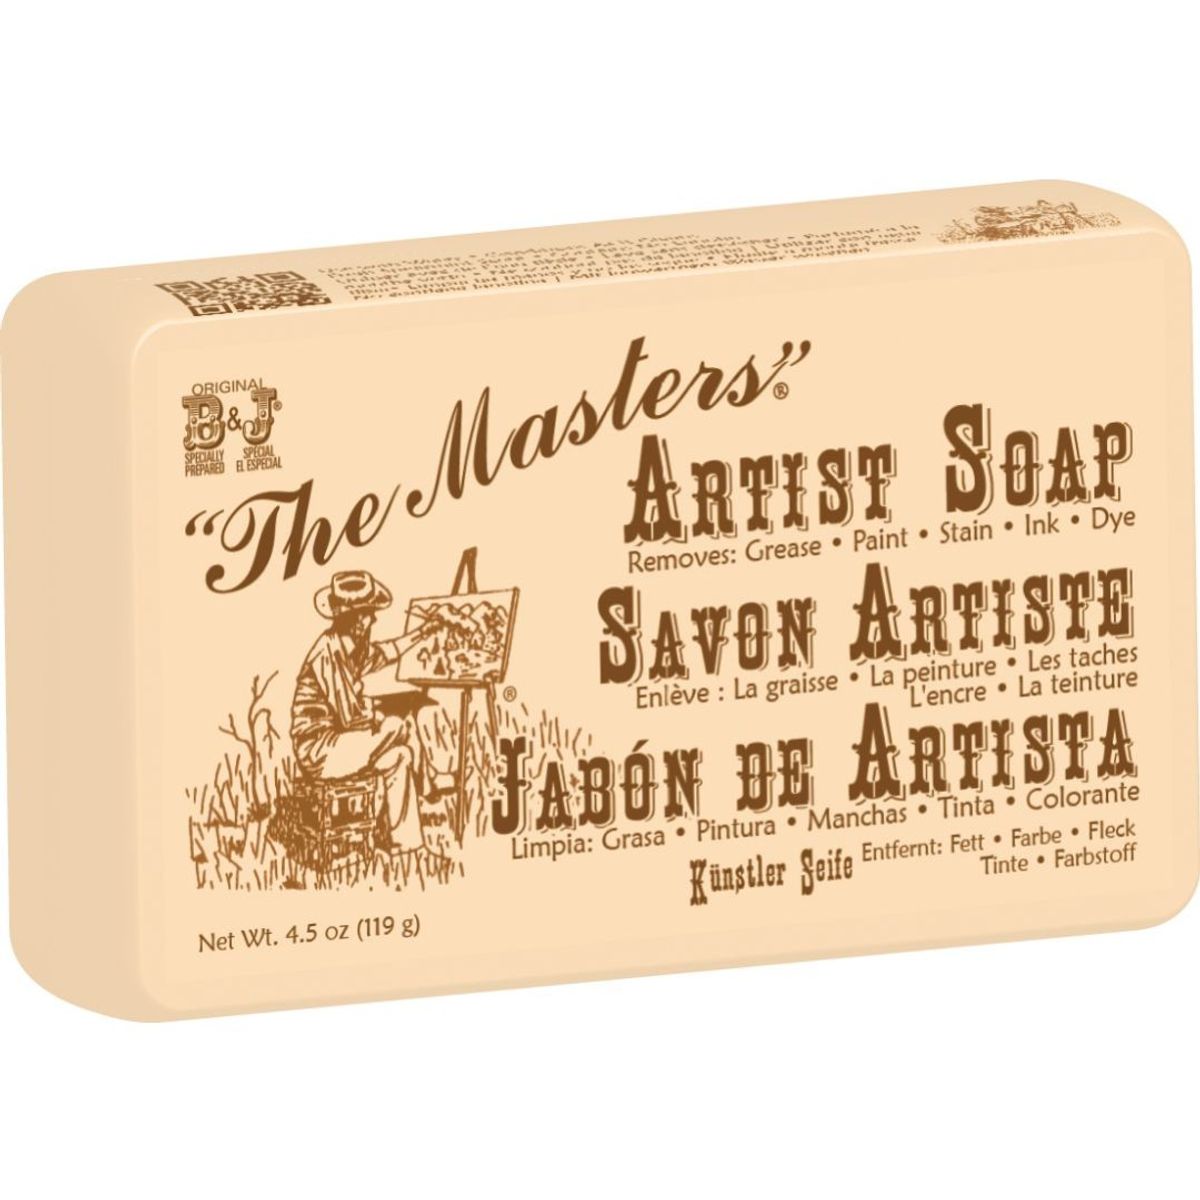 General's The Masters Artist Hand Soap